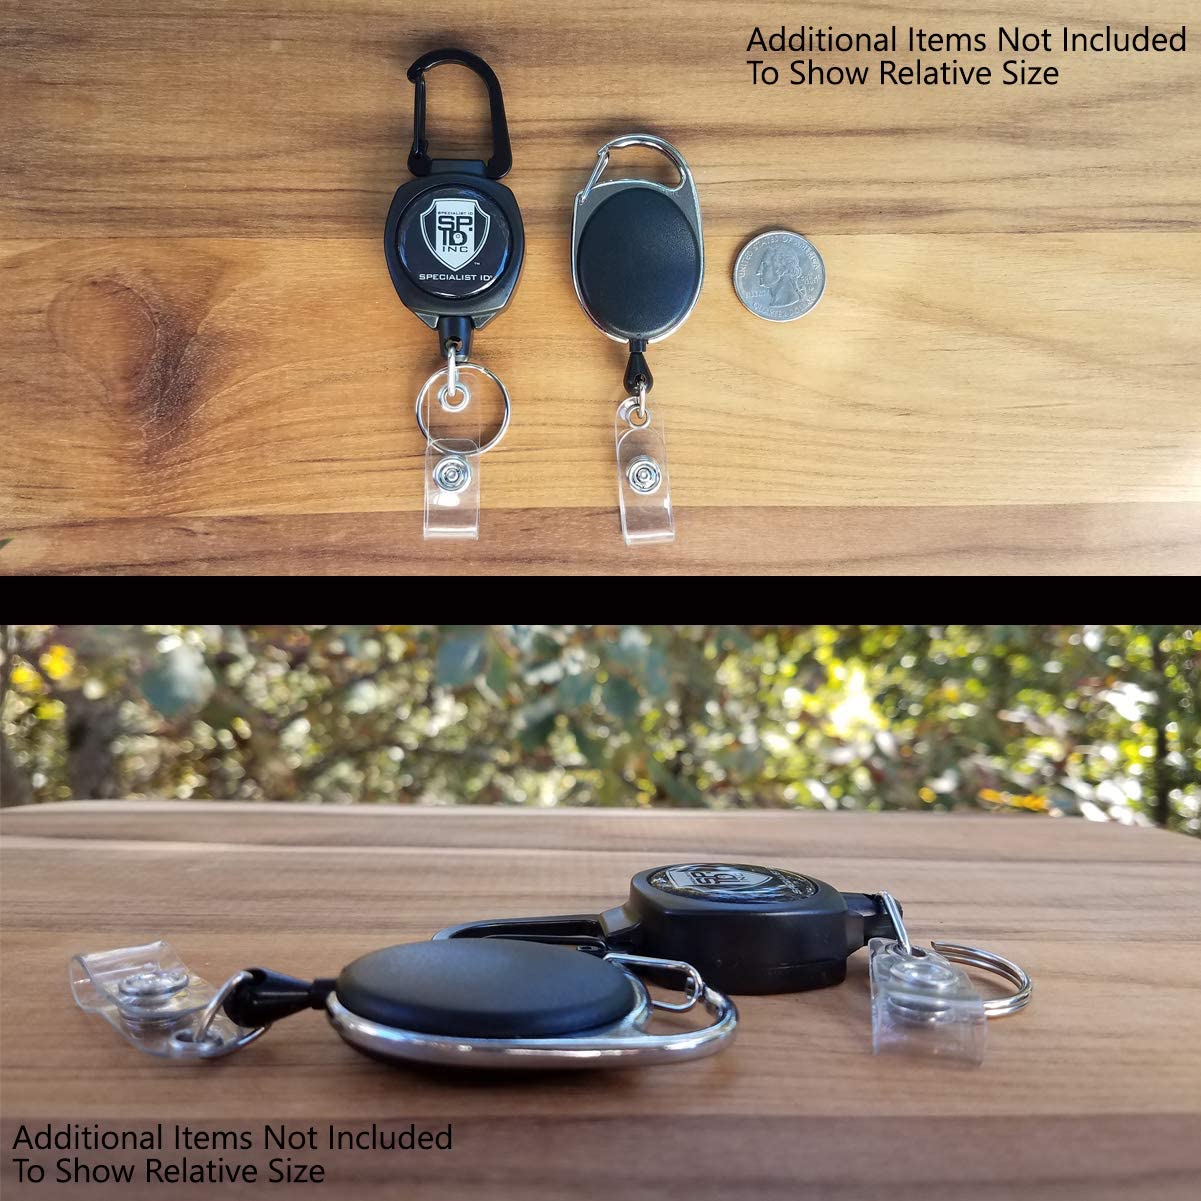 Two SPID Key-Bak SIDEKICK Heavy Duty Retractable Carabiner Badge Reels with ID Holder Strap & Keychains shown against a wooden surface, one in a vertical and another in a horizontal position. A coin is placed nearby for size comparison. These keychains feature Kevlar retractable cords, ensuring durability for everyday use.